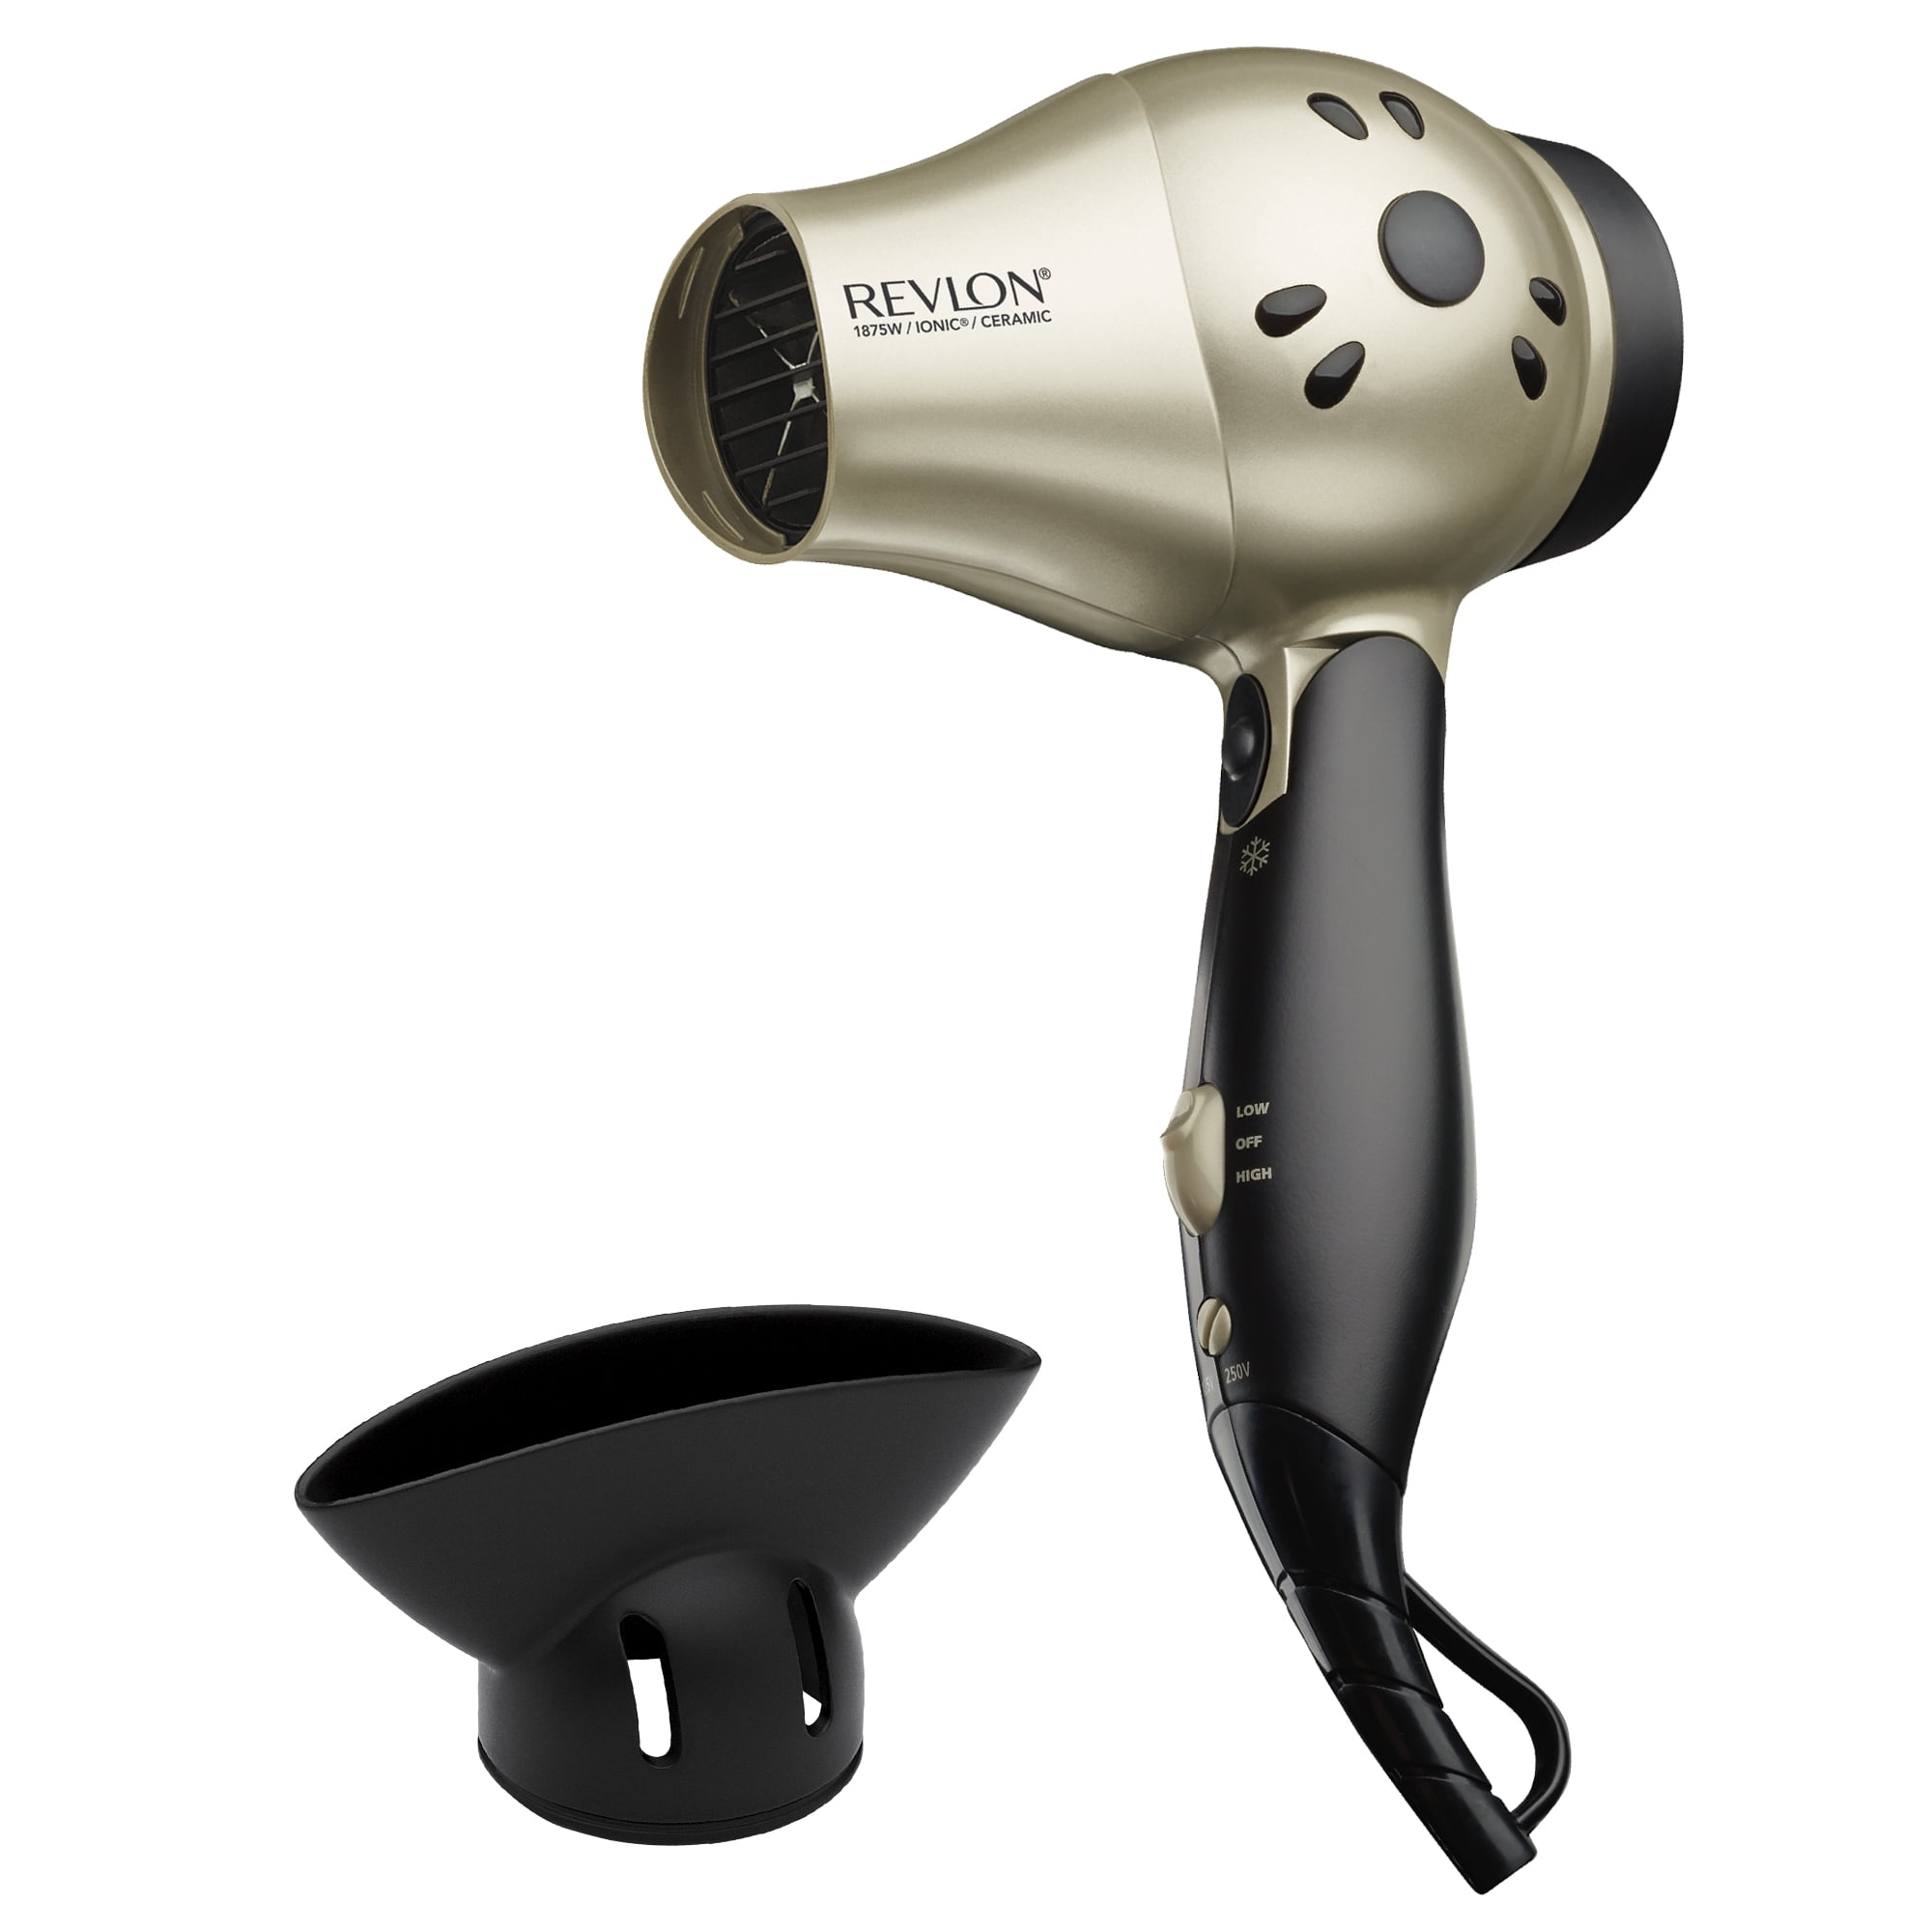 Revlon Folding Handle Travel Hair Dryers, Black and Gold with Concentrator  Nozzle - Walmart.com